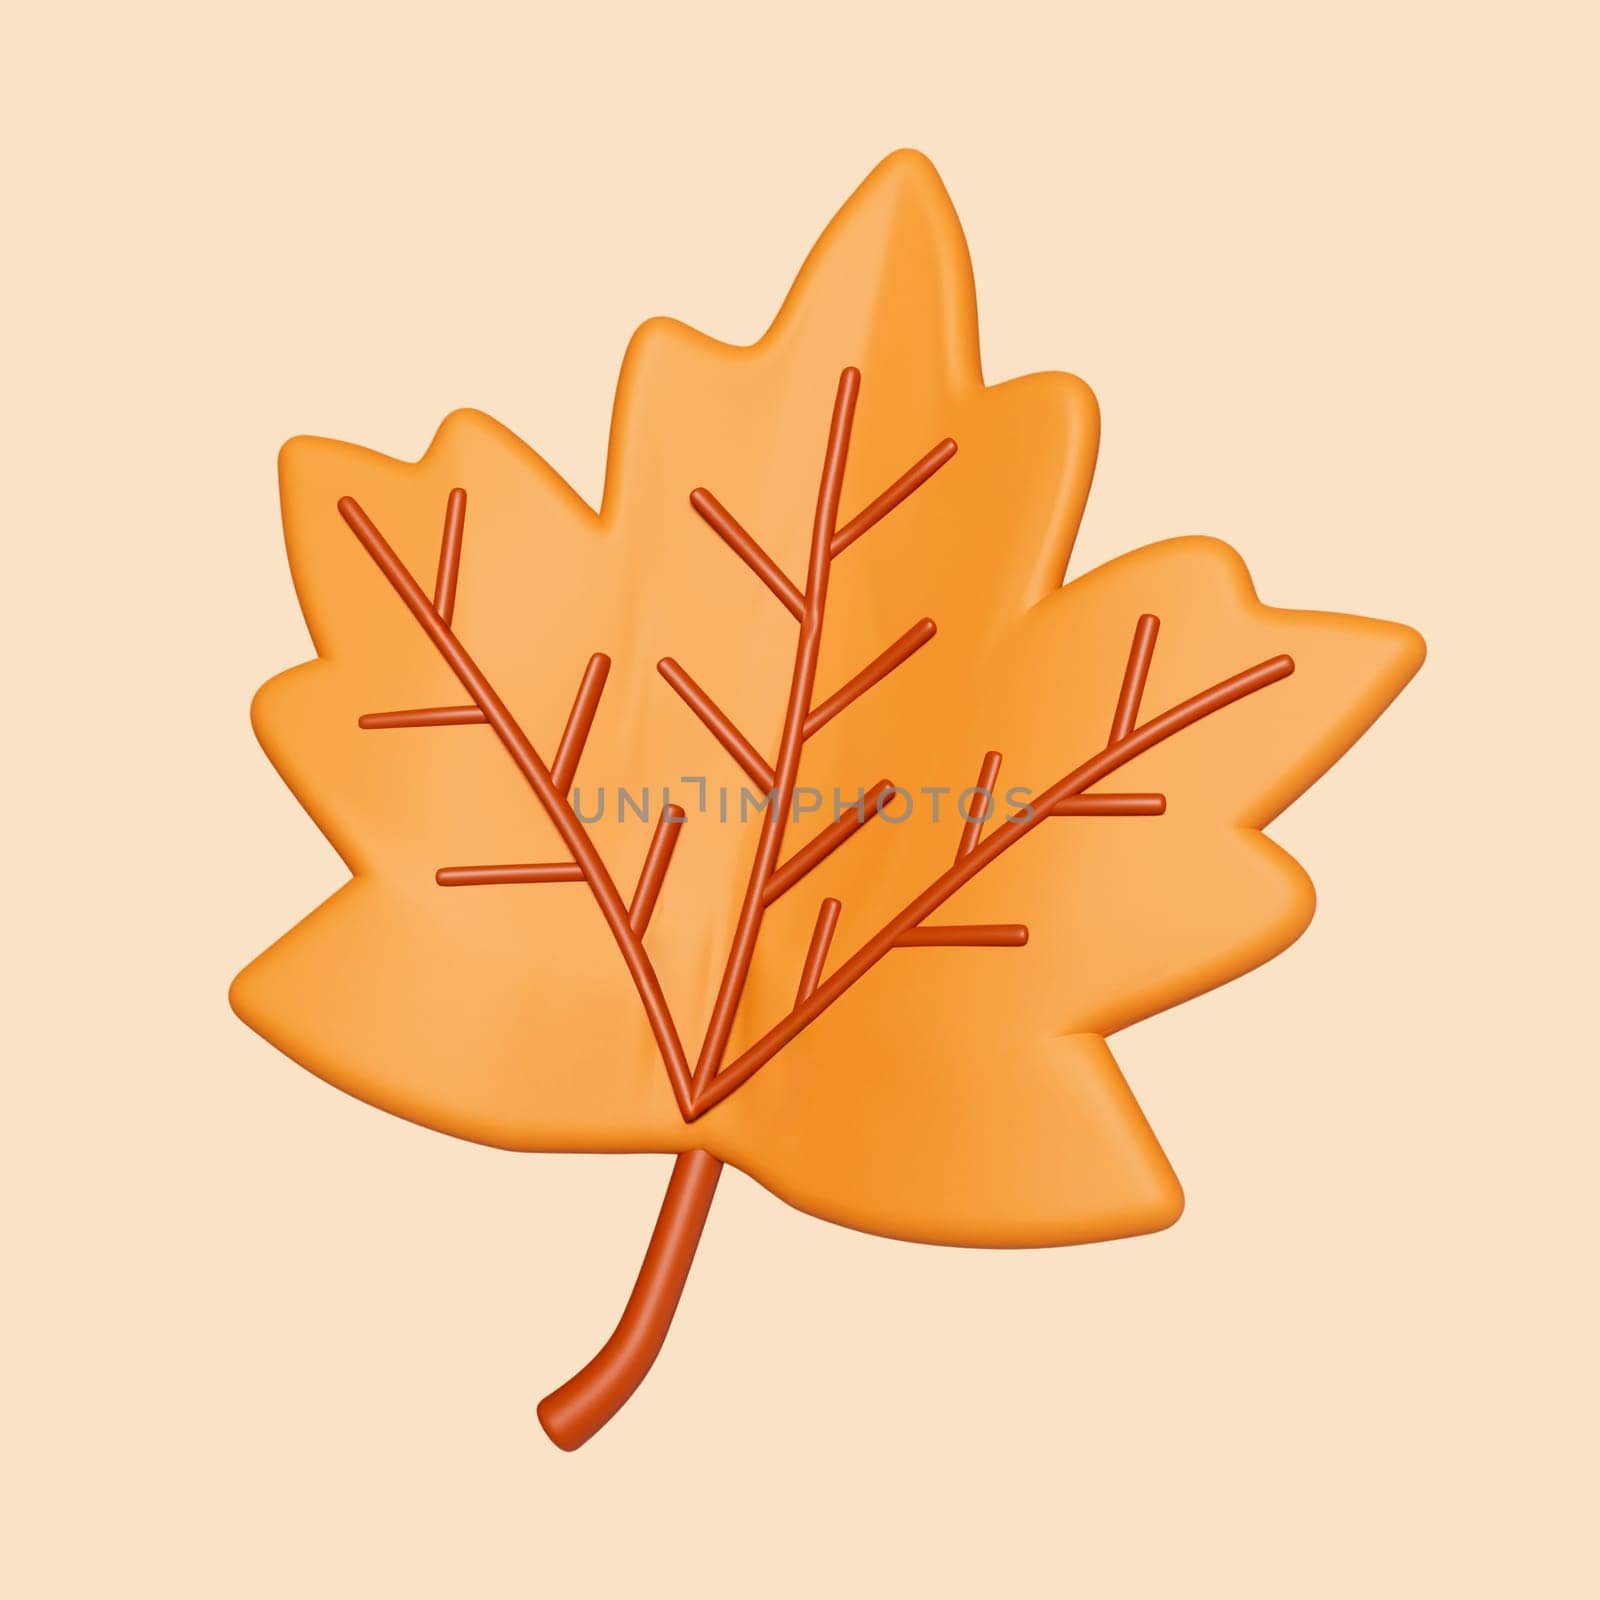 3d Autumn maple leaf. Golden fall. Season decoration. icon isolated on gray background. 3d rendering illustration. Clipping path. by meepiangraphic